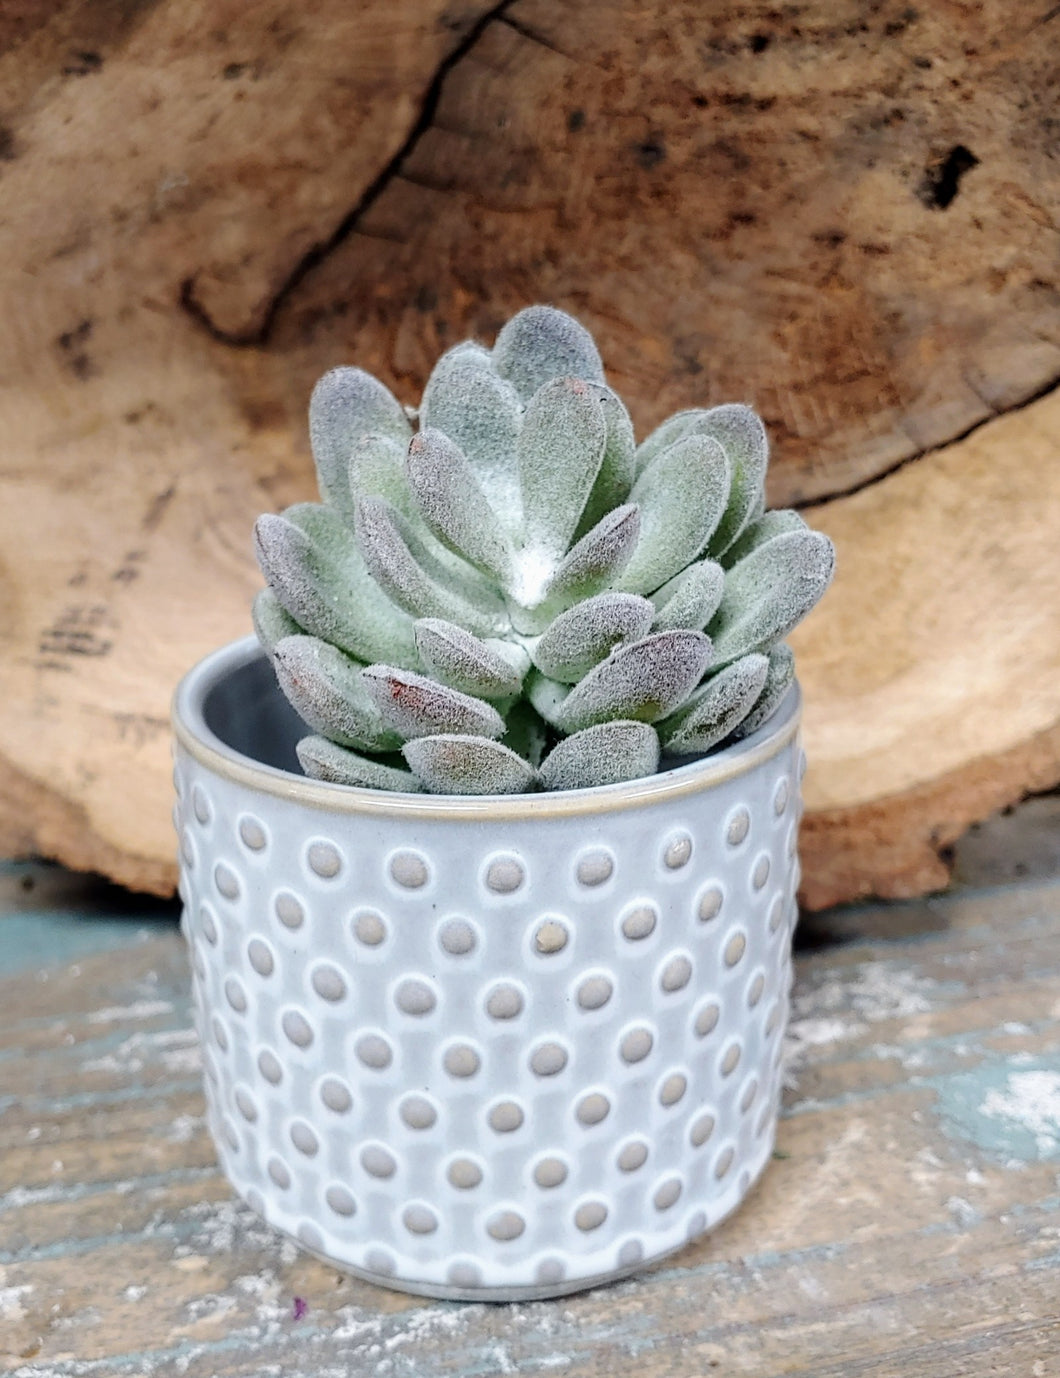 3 INCH BY 3 INCH, CERAMIC, SUCCULENT PLANTER POT. GREY-BLUE POT WITH LIGHT TAN COLORED ‘DOTS’ DESIGN. IT IS SITTING ON A WOODEN TABLE, IN FRONT OF A WOODEN, ROUGH-EDGED TRAY LEANING ON A BLUE WALL. HOLDING SOIL AND SUCCULENT WITH VELVETY-SILVER LEAVES WITH LIGHT BROWN SHADING. SOIL AND PLANTS SOLD SEPARATELY.